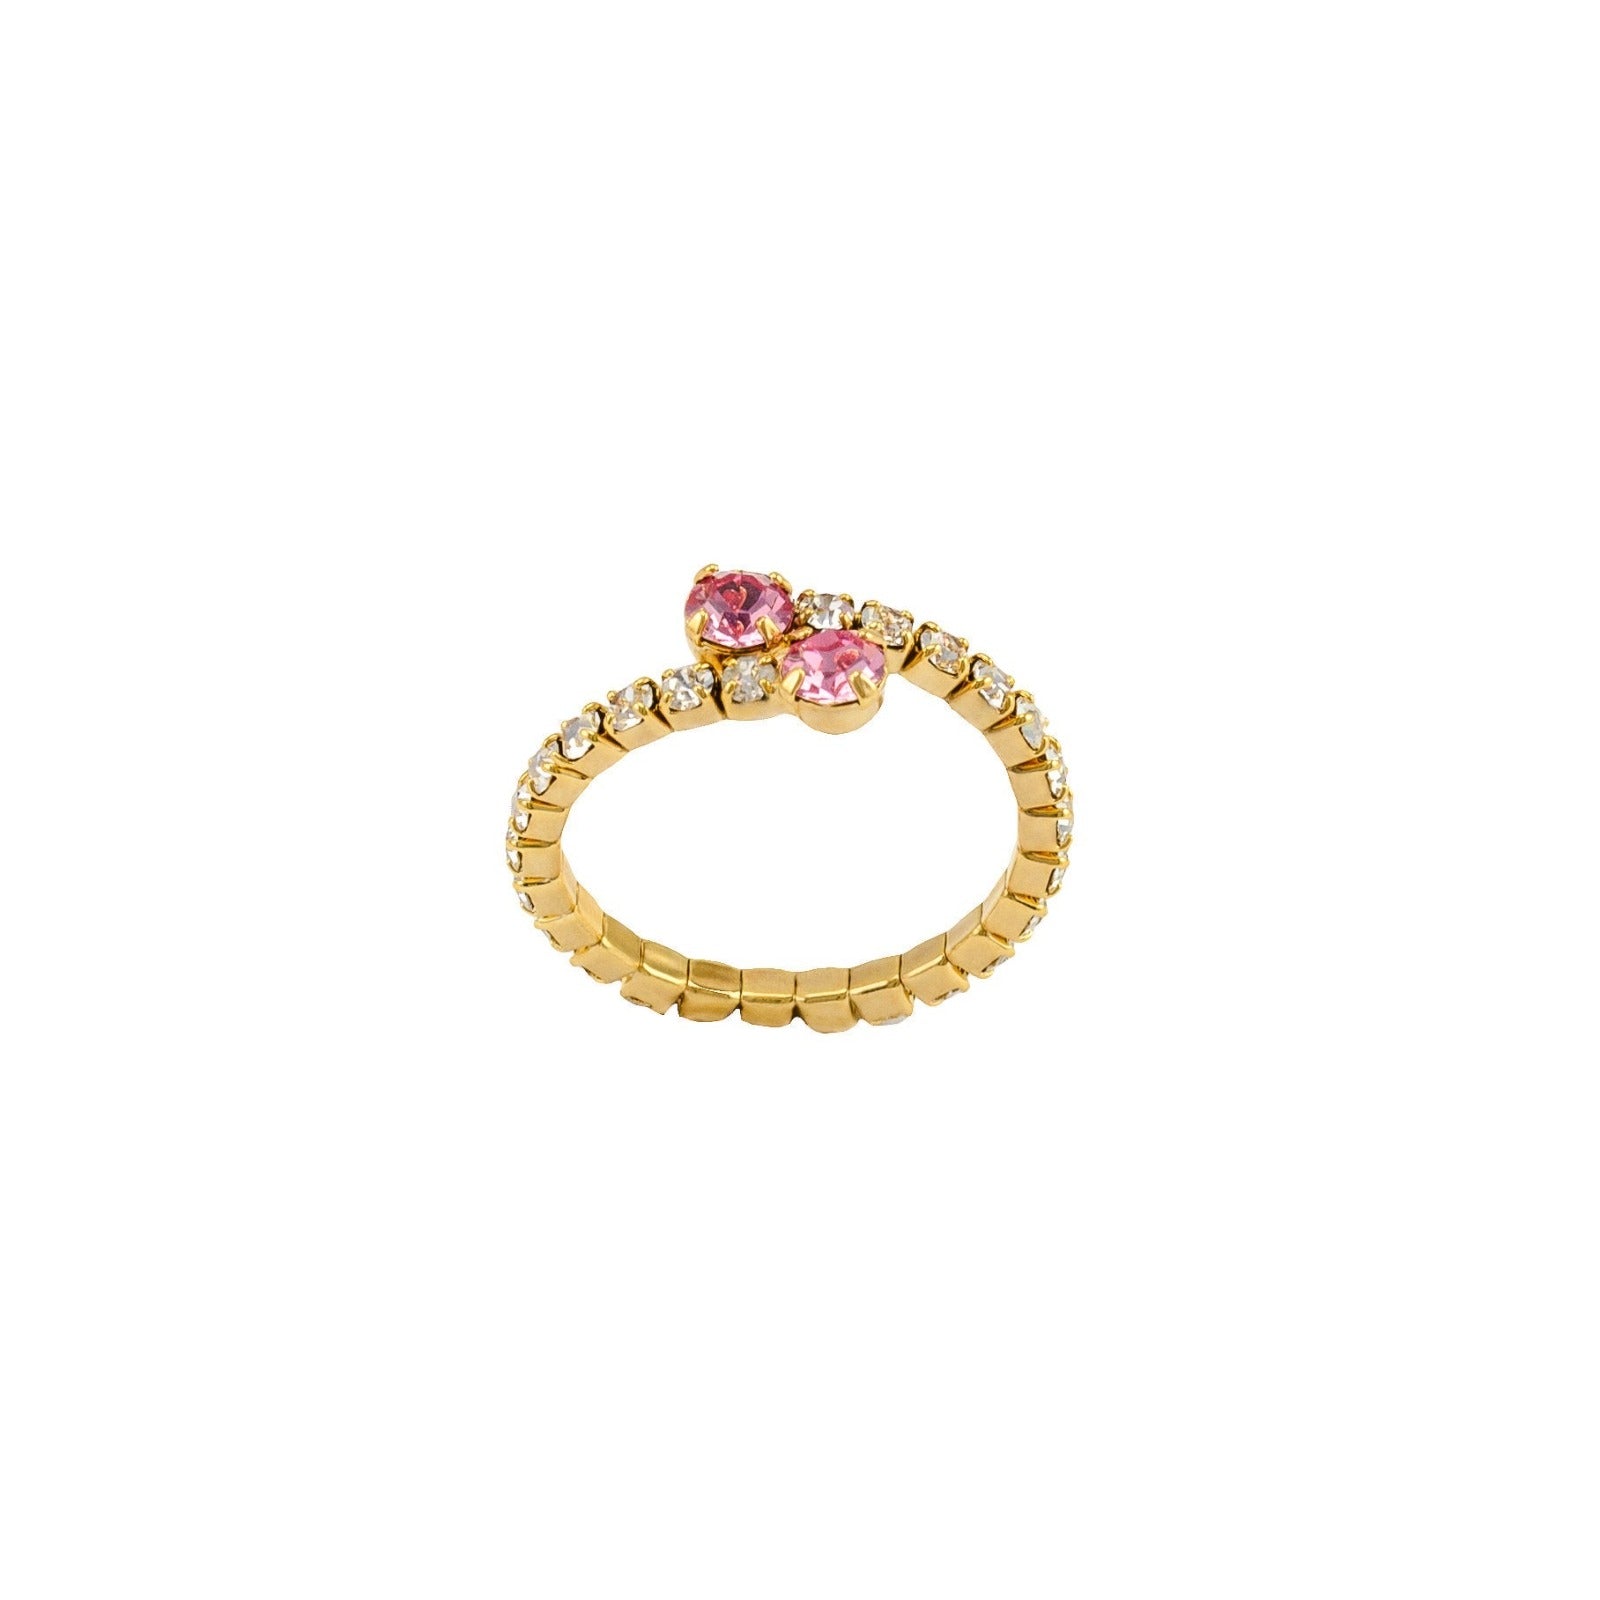 Fantasy ring with two Pink color stones in the center and all around with rhinestones white 